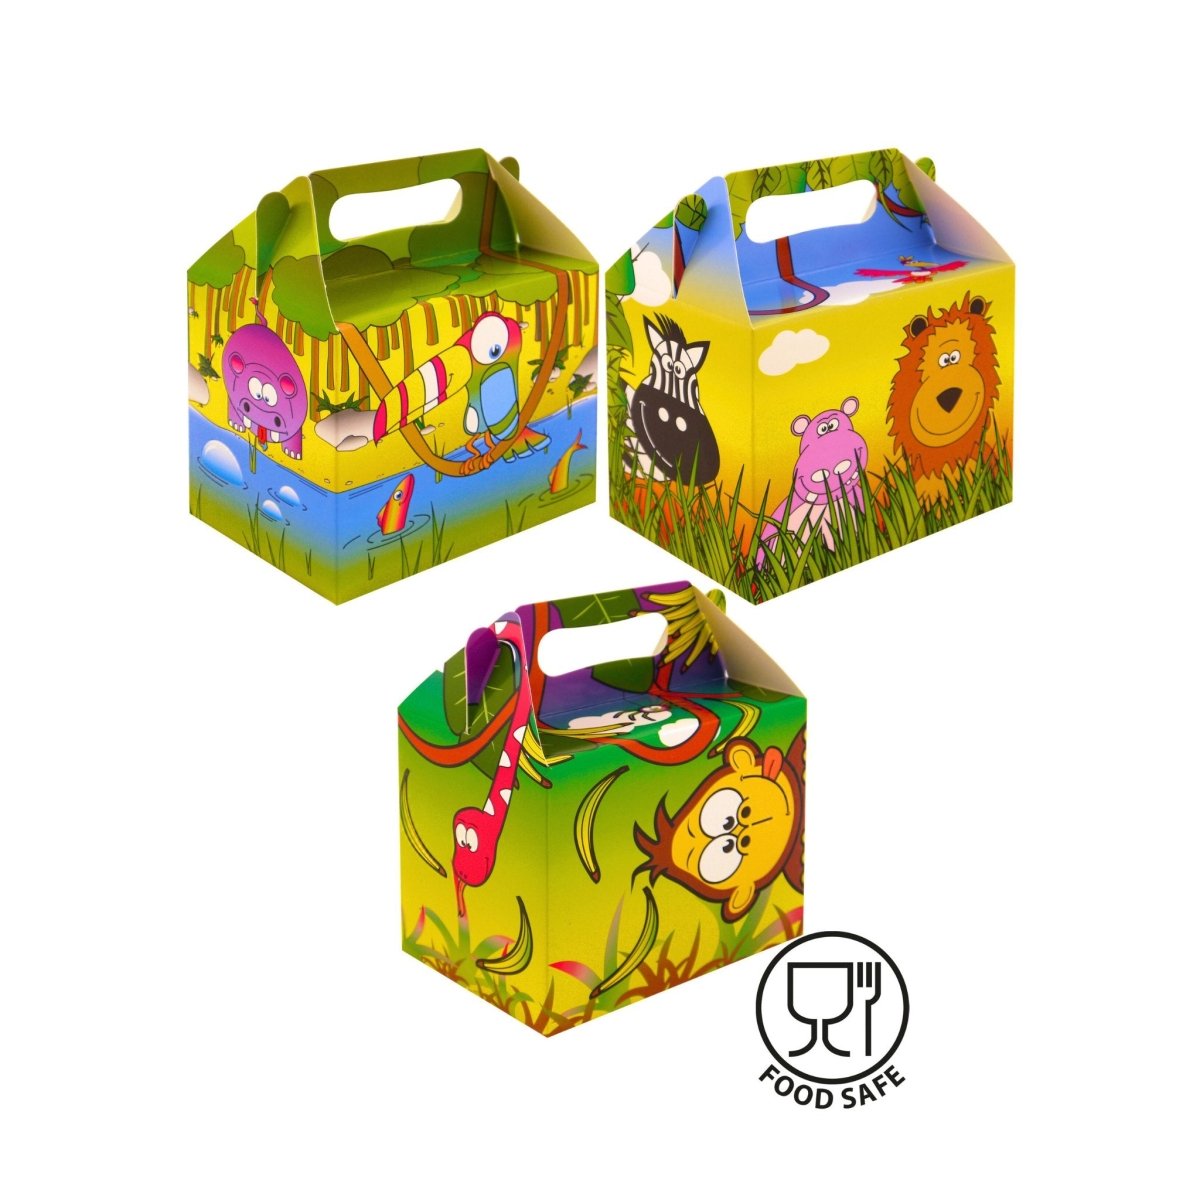 Jungle Themed Party Food Boxes - Kids Party Craft